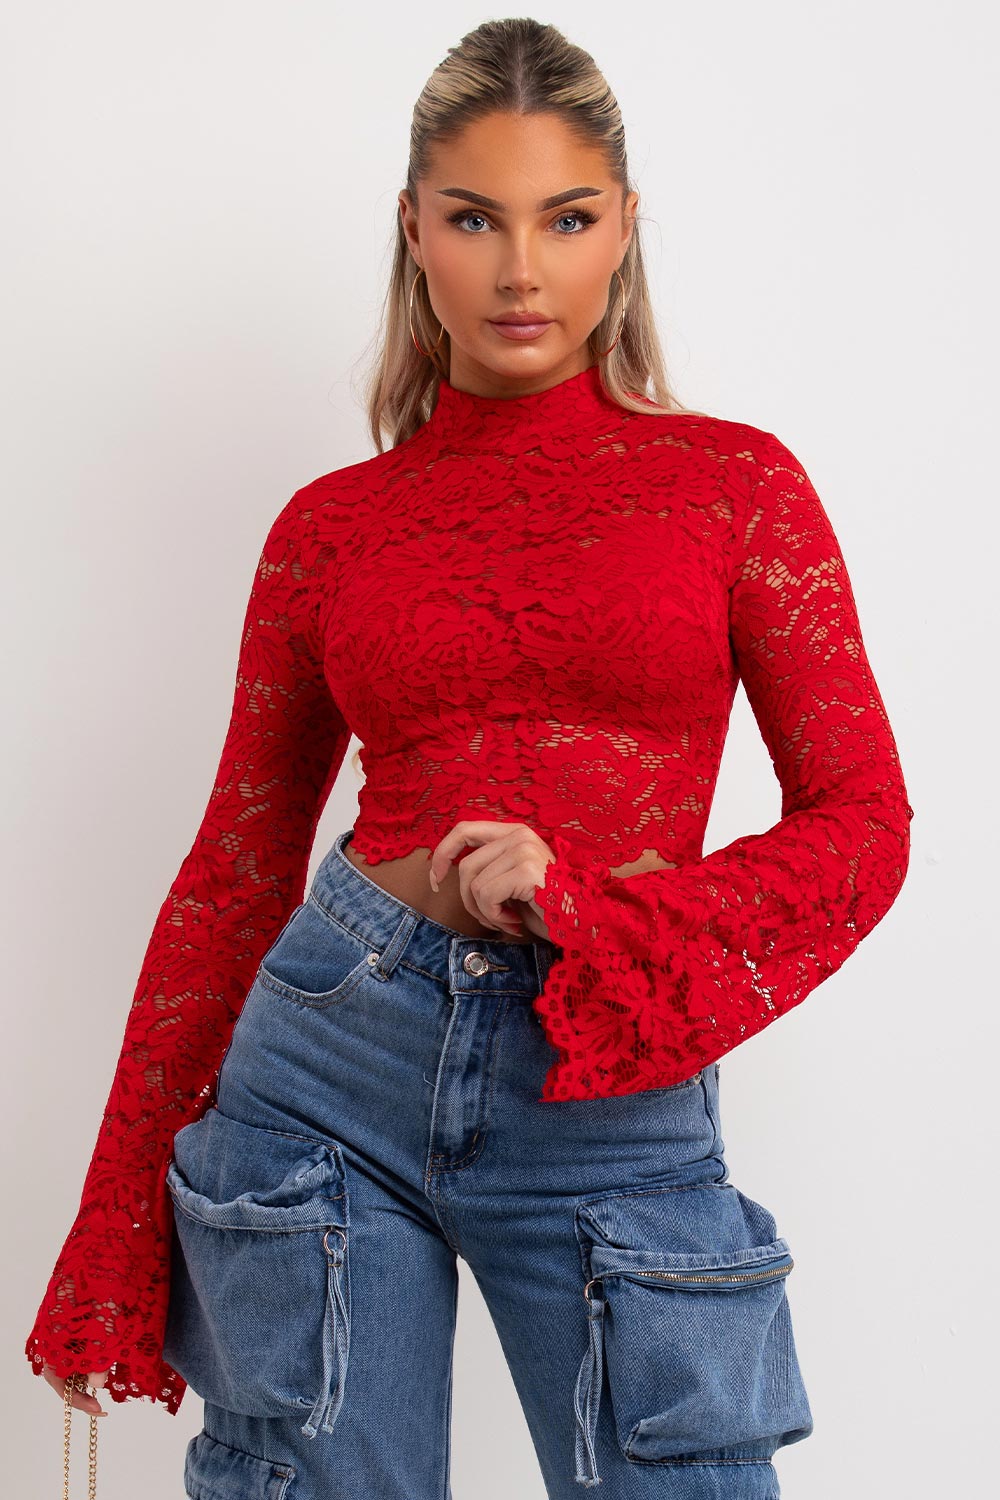 long flare sleeve lace top red going out summer festival outfit